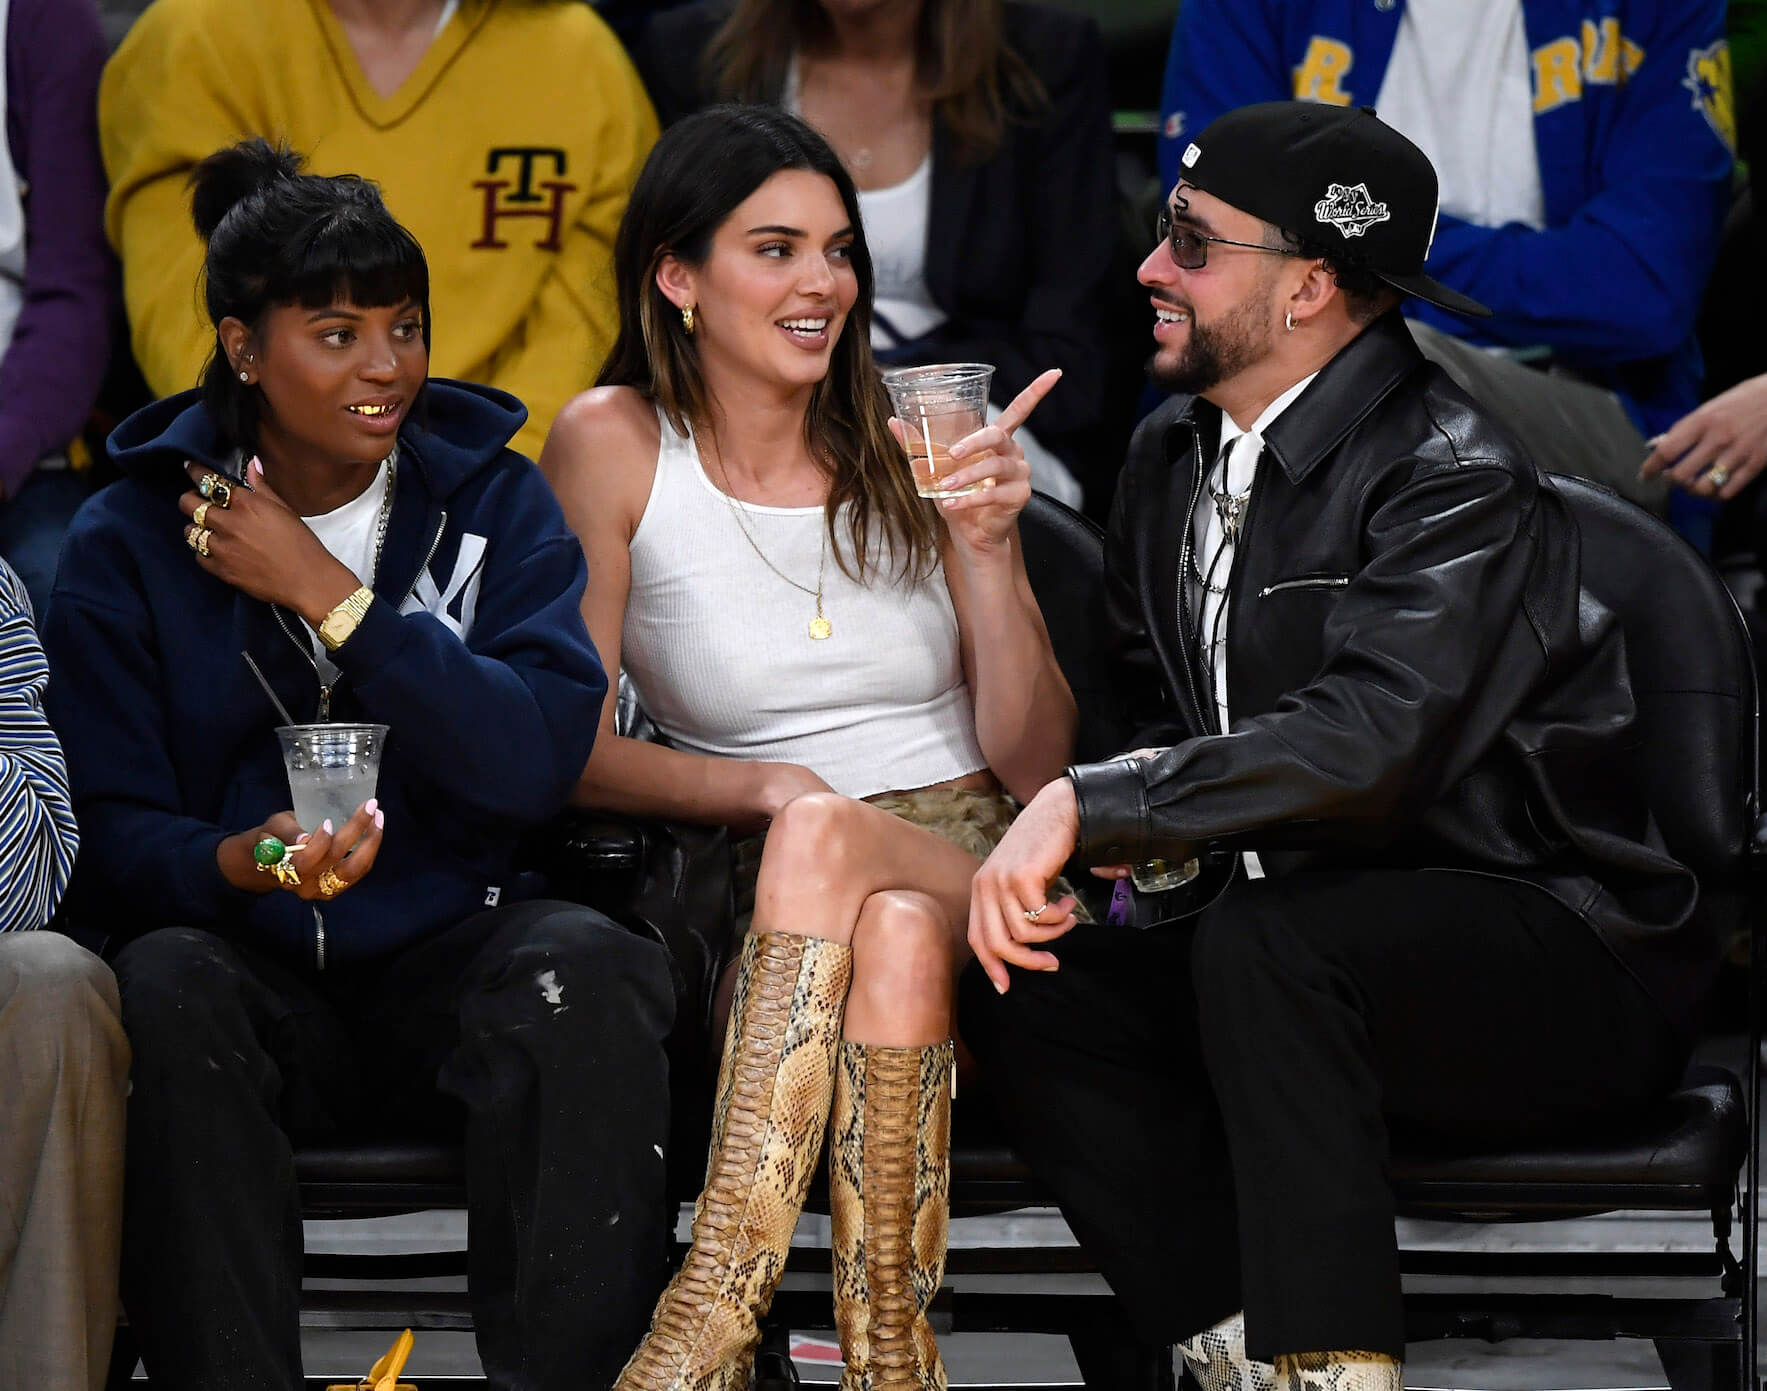 Kendall Jenner sitting next to Bad Bunny and pointing at him while attending the Western Conference Semifinal Playoff game between the Lakers and the Golden State Warriors in 2023